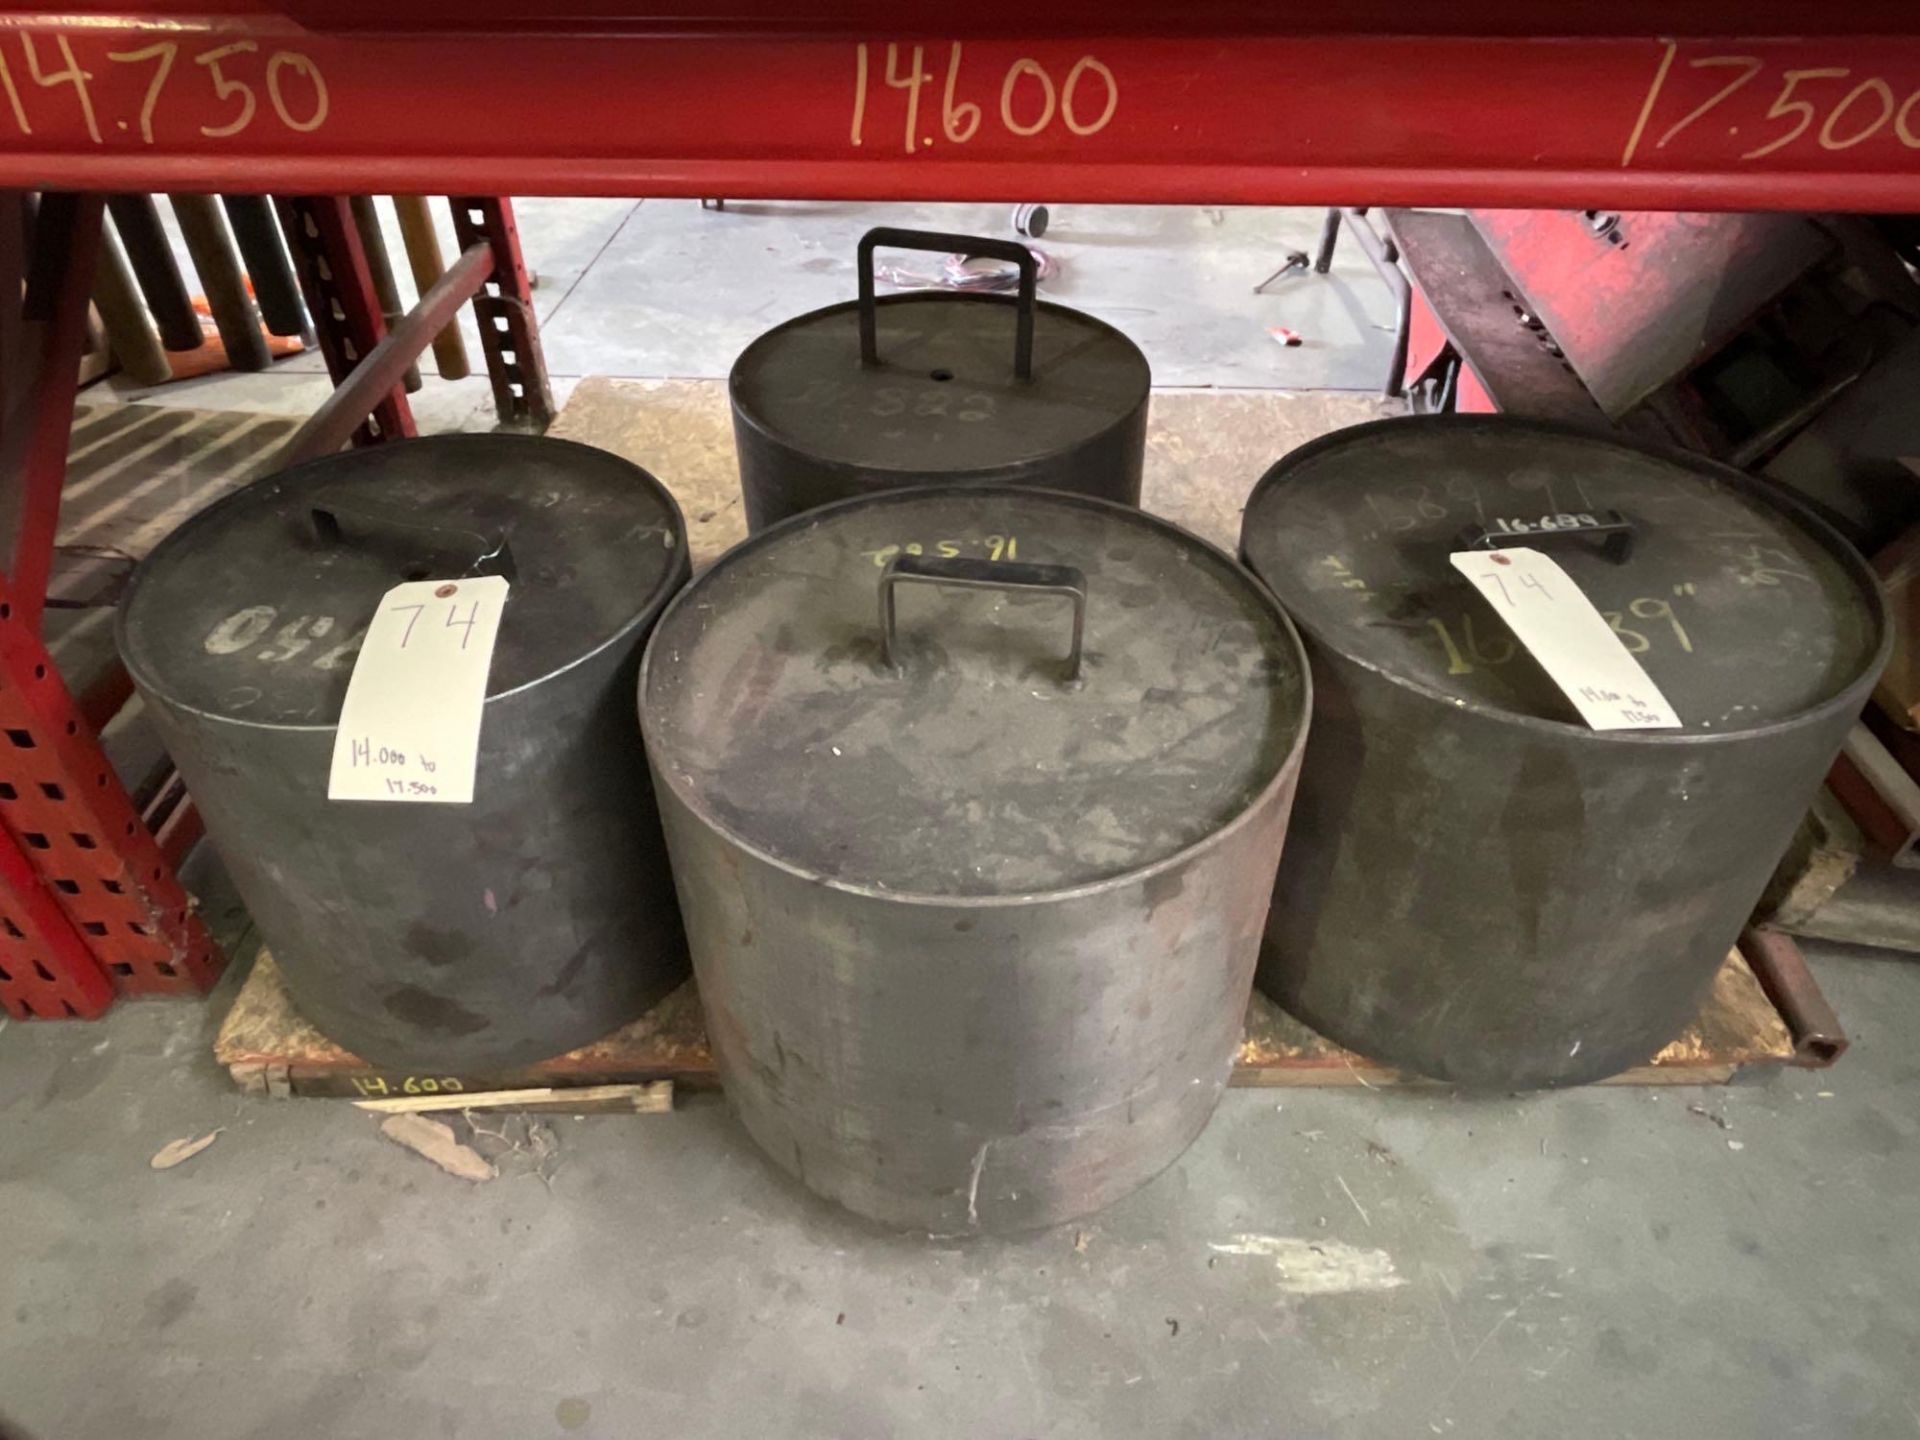 Lot of 7: Testing Pipe Drifts, Sizes from 14.00 to 17.500